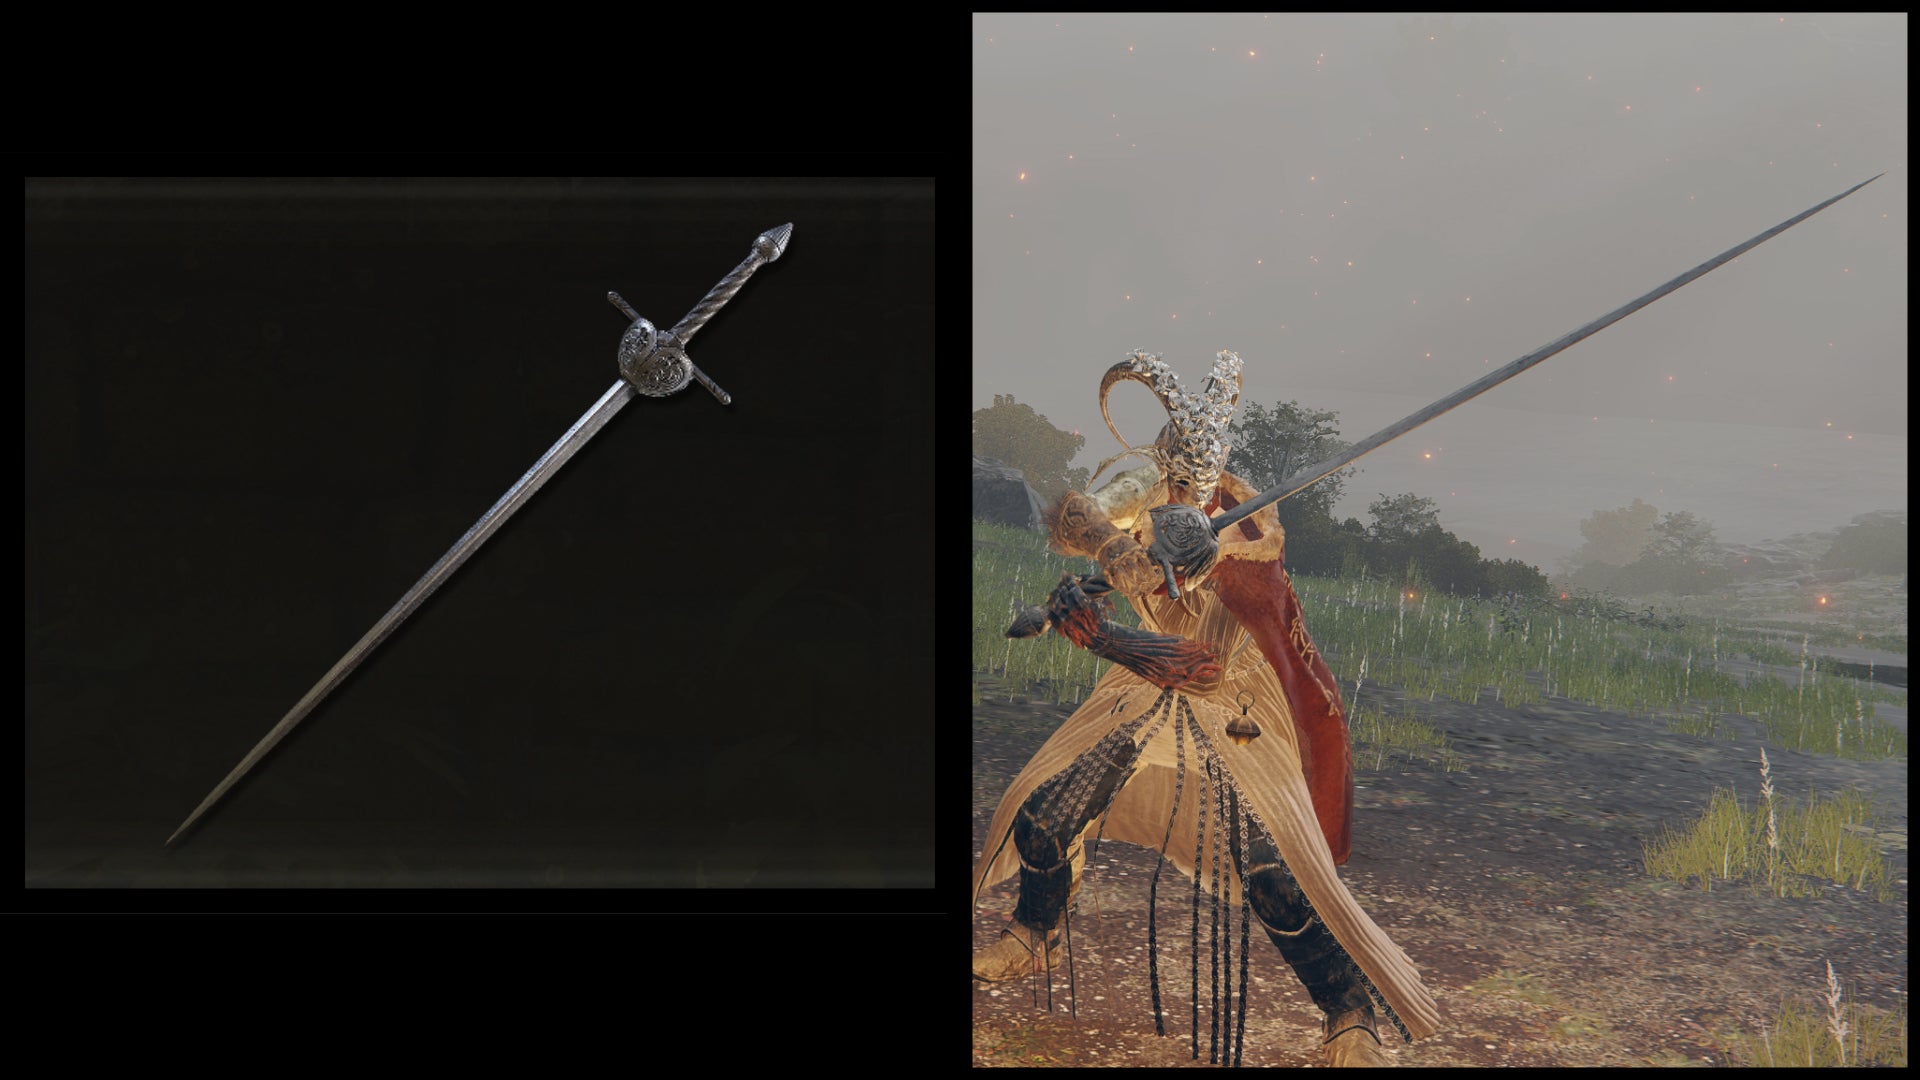 Left: an illustration of the Great Epee from Elden Ring. Right: the player character holding the same weapon against a Limgrave background.